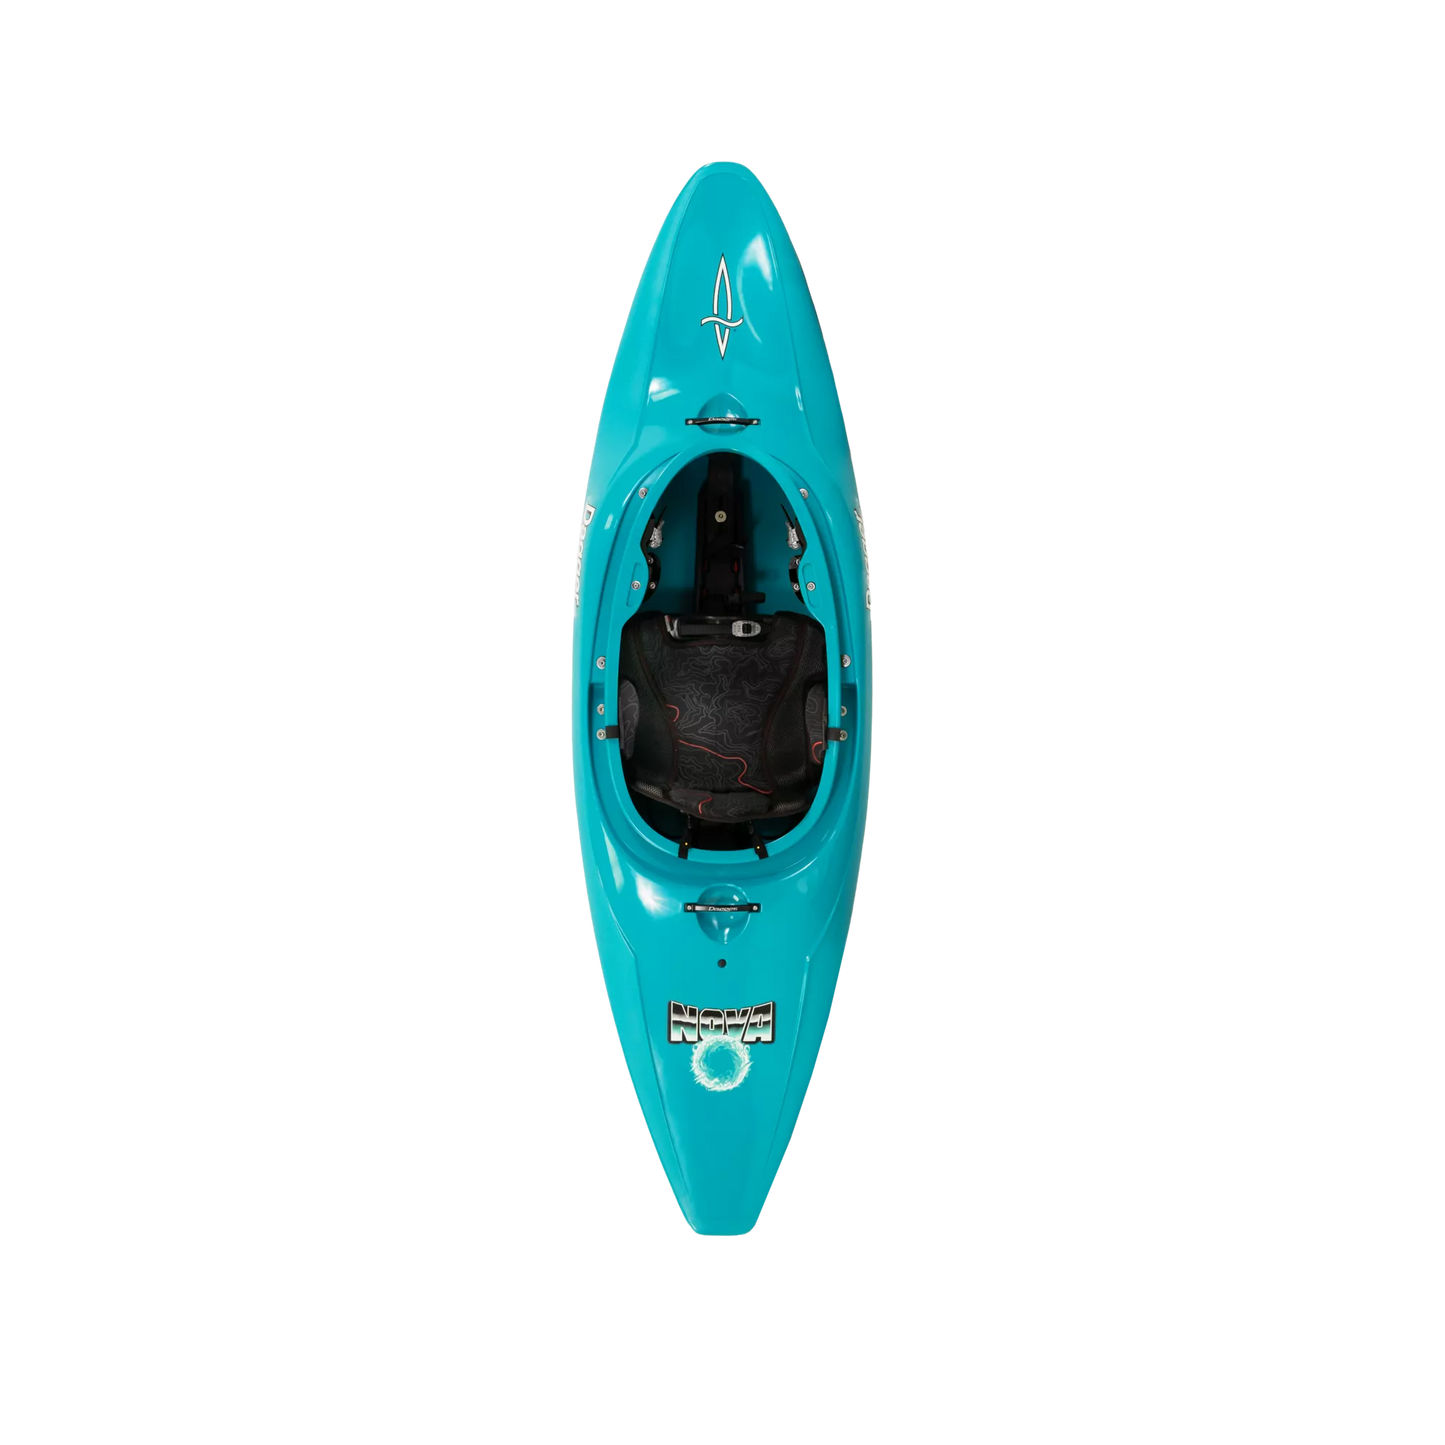 Turquoise full slice river play whitewater kayak.The Dagger Nova and Supernova are uniquely designed for 2 different paddler size ranges so you can saddle up, slice, surf, and spin your way to hours of amusement. 